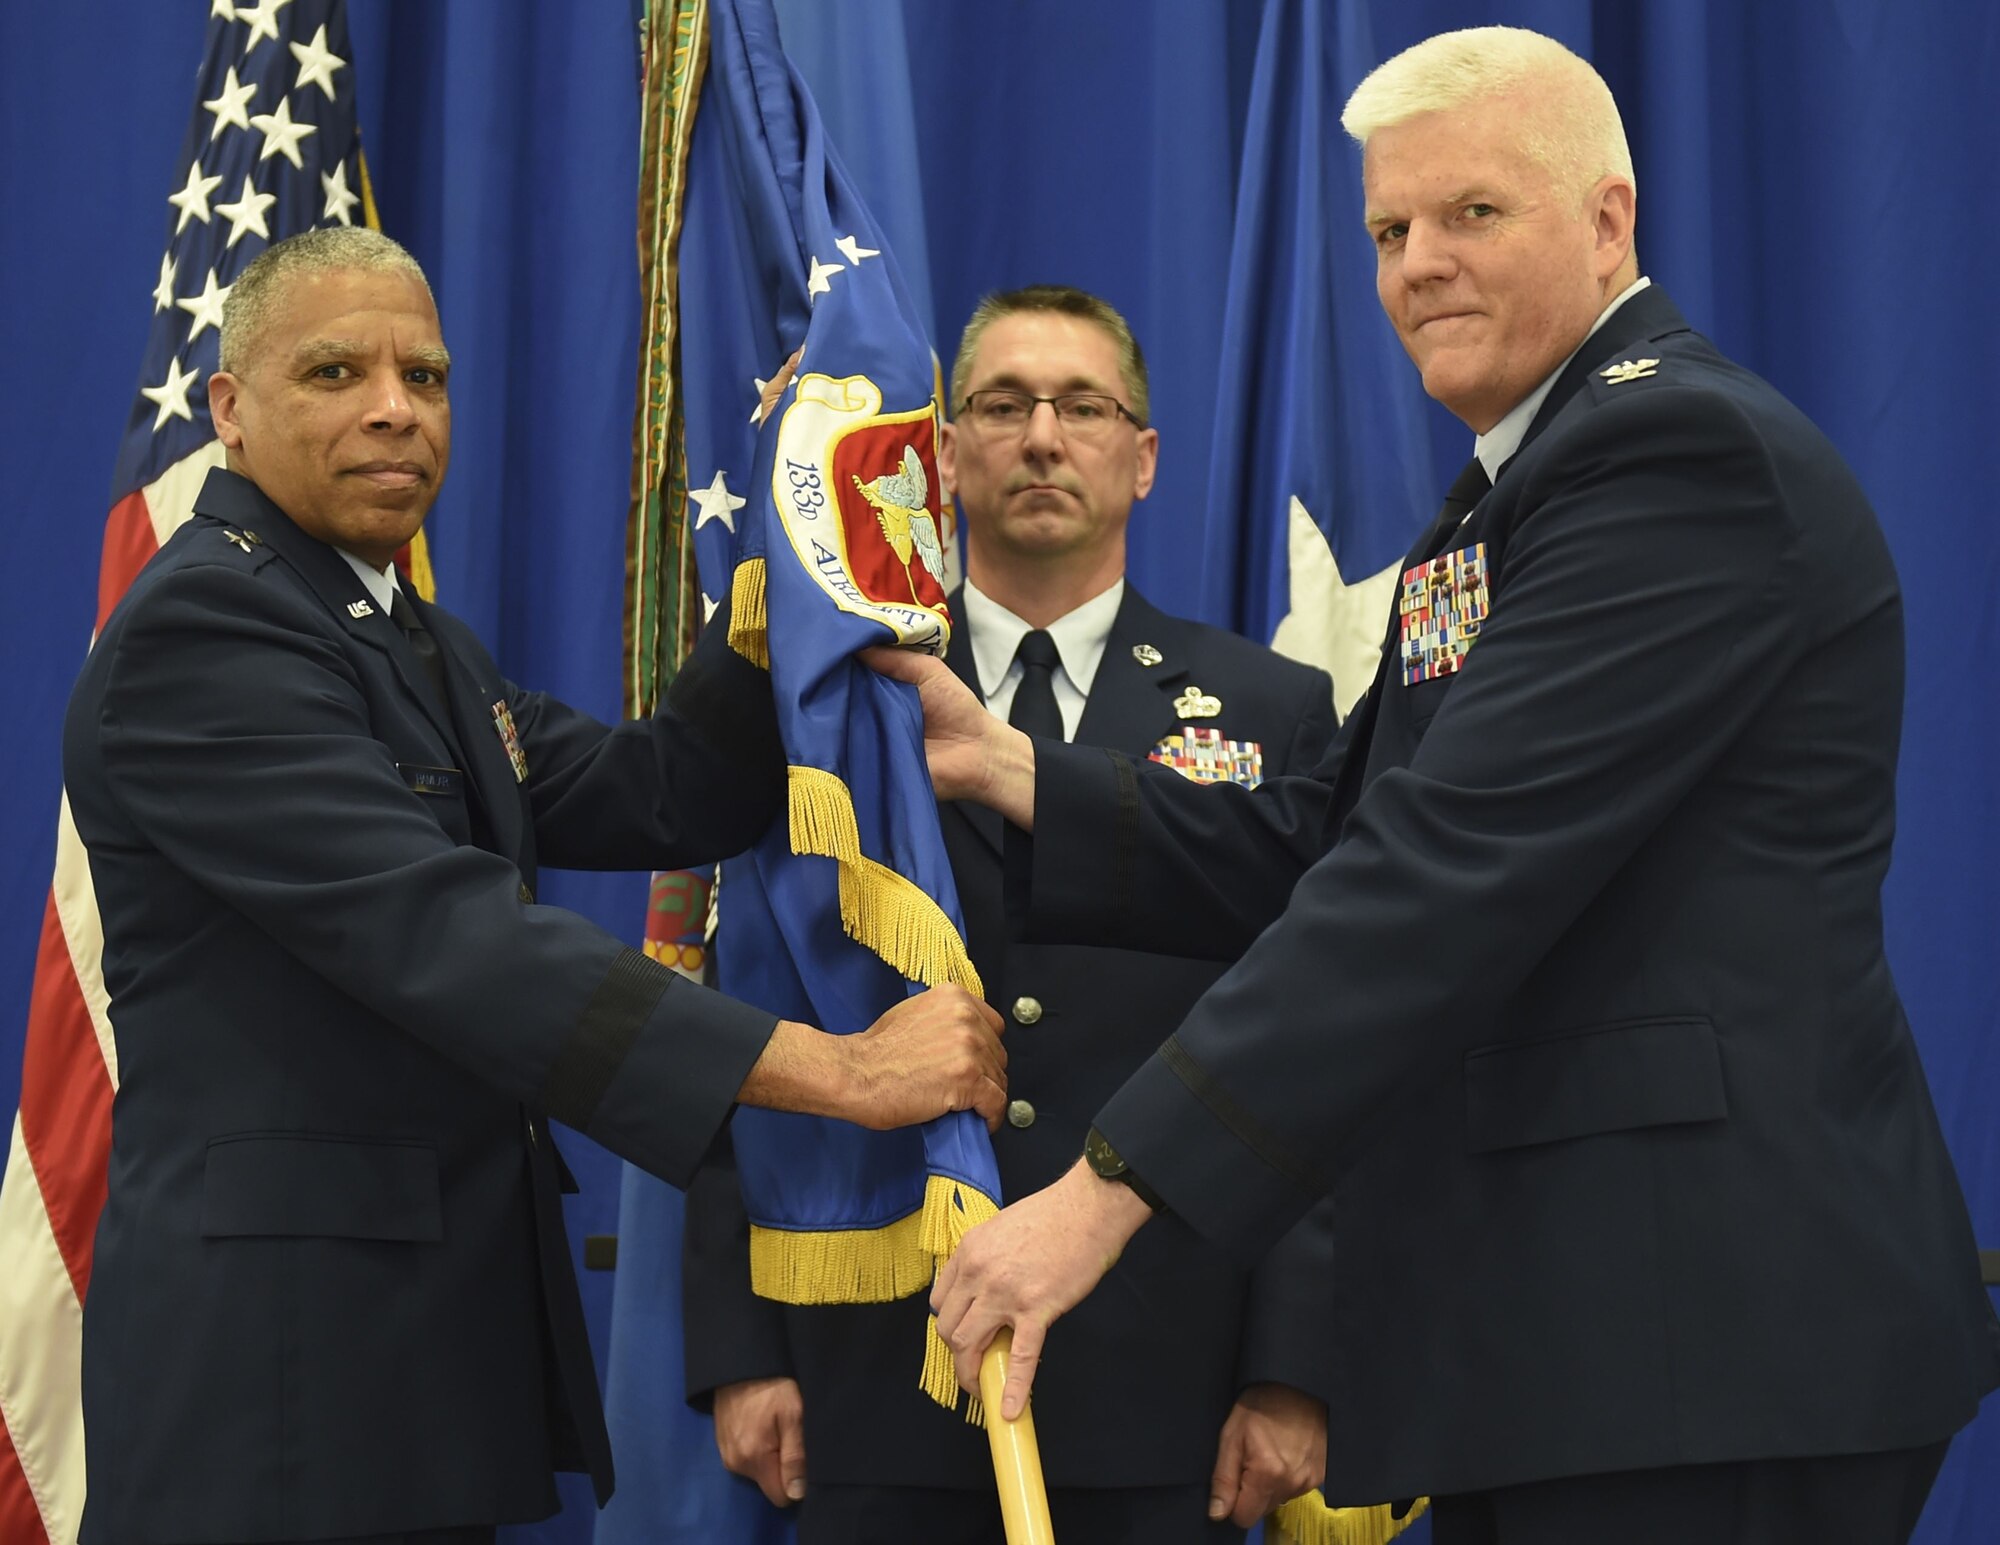 U.S. Air Force Col. James Johnson, relinquished command of the 133rd Airlift Wing to Brig. Gen. David Hamlar, Assistant General Air National Guard, in St. Paul, Minn., Apr. 16, 2016.